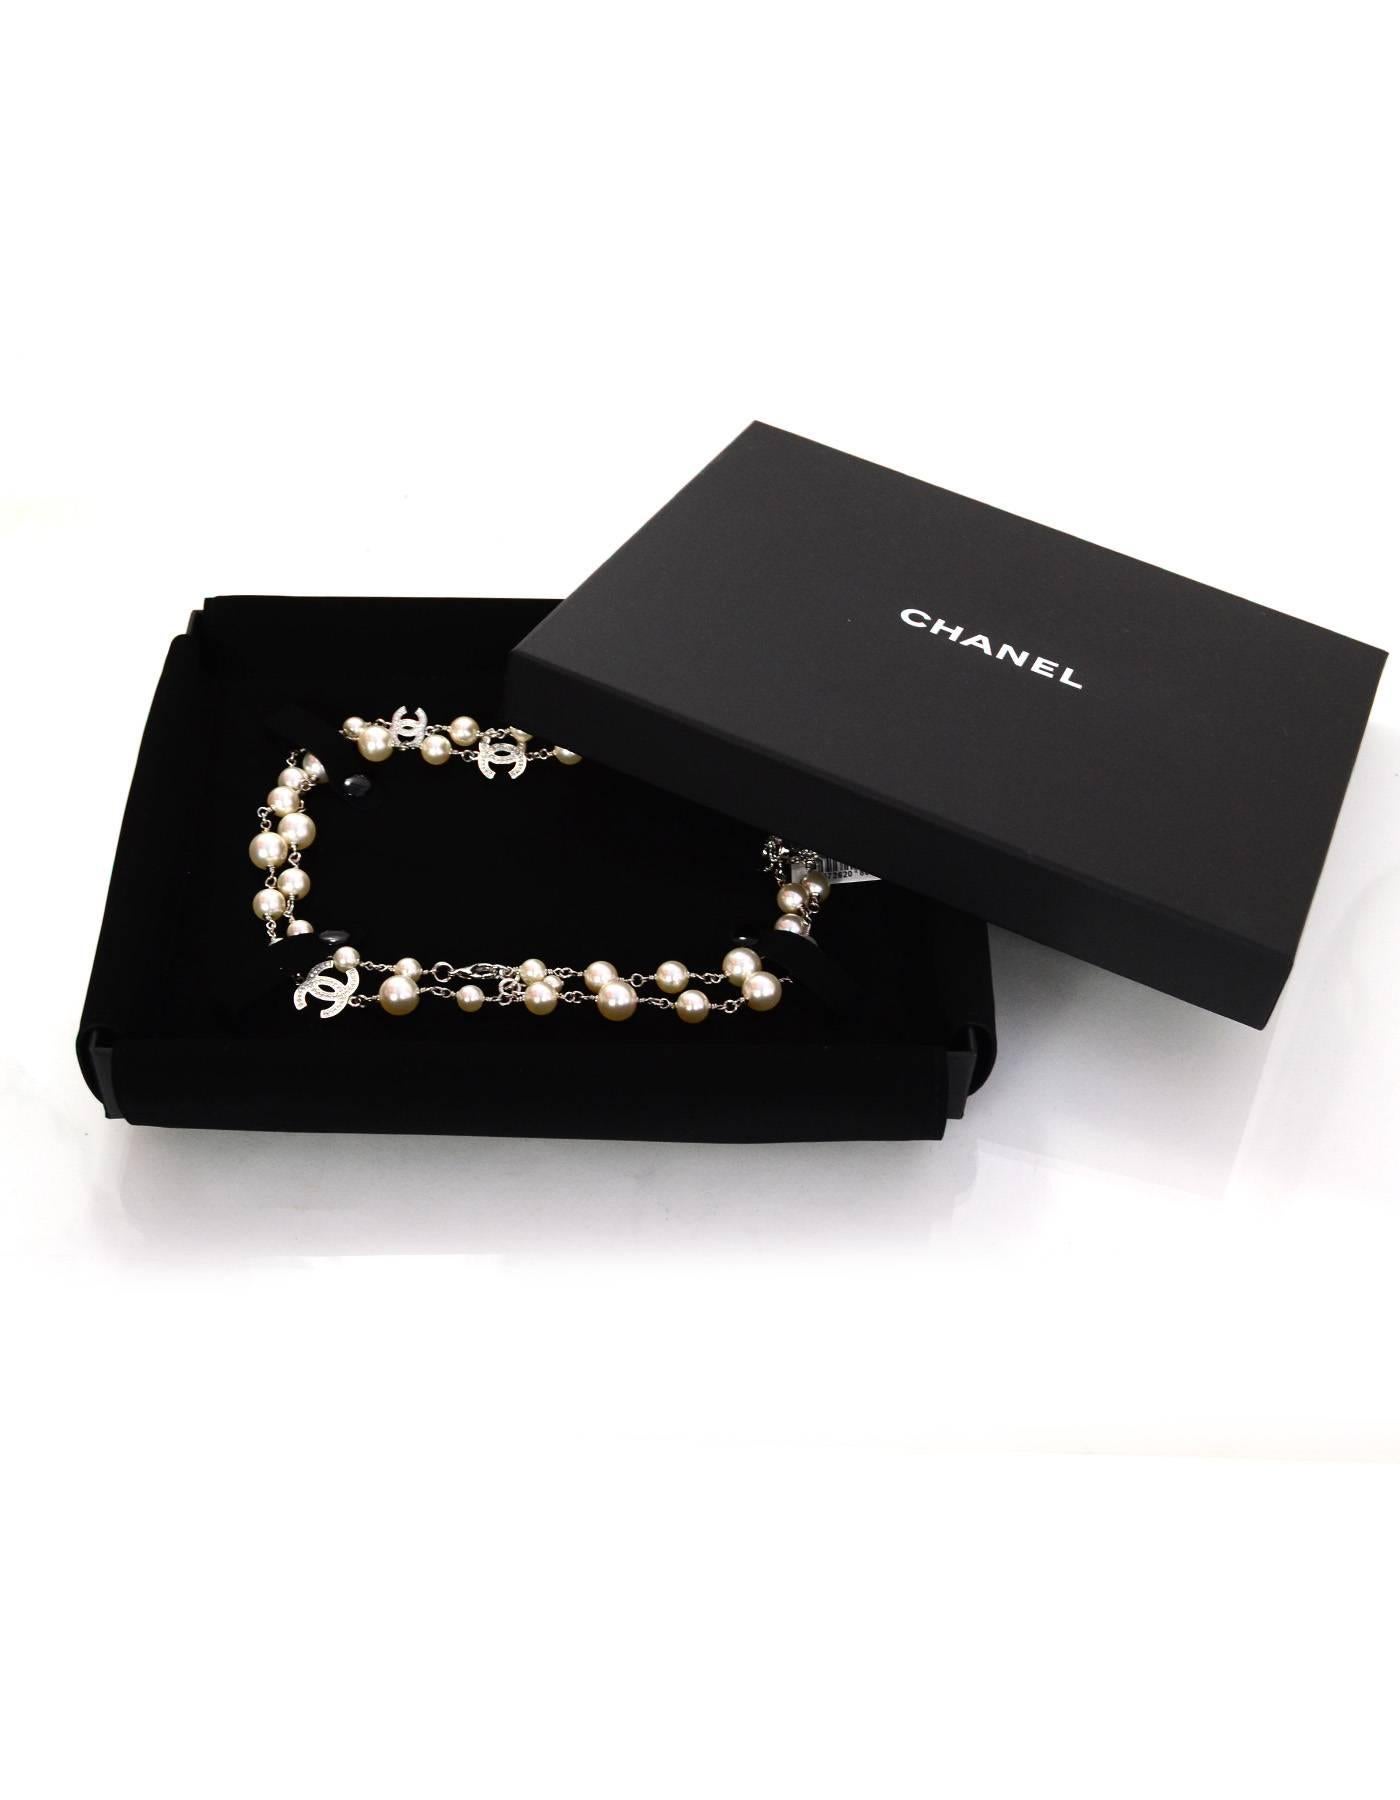 chanel necklace box